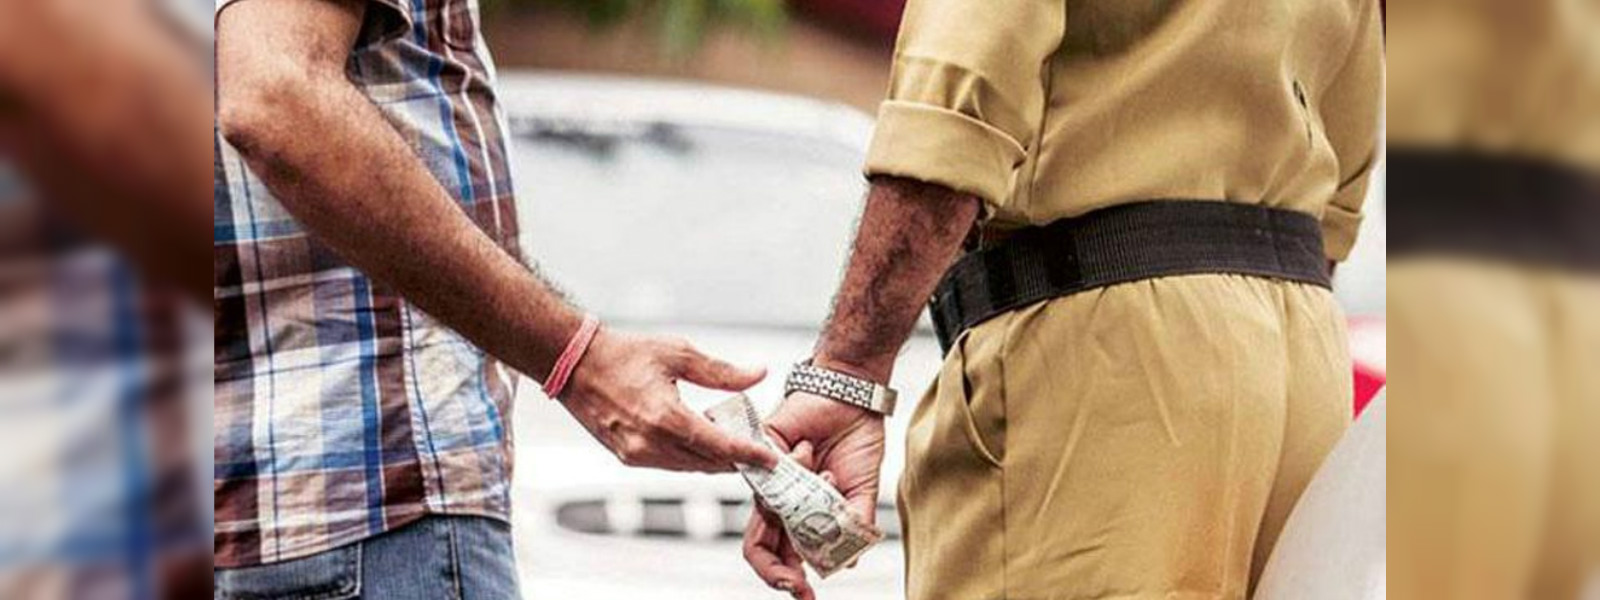 OIC caught red handed while accepting a bribe